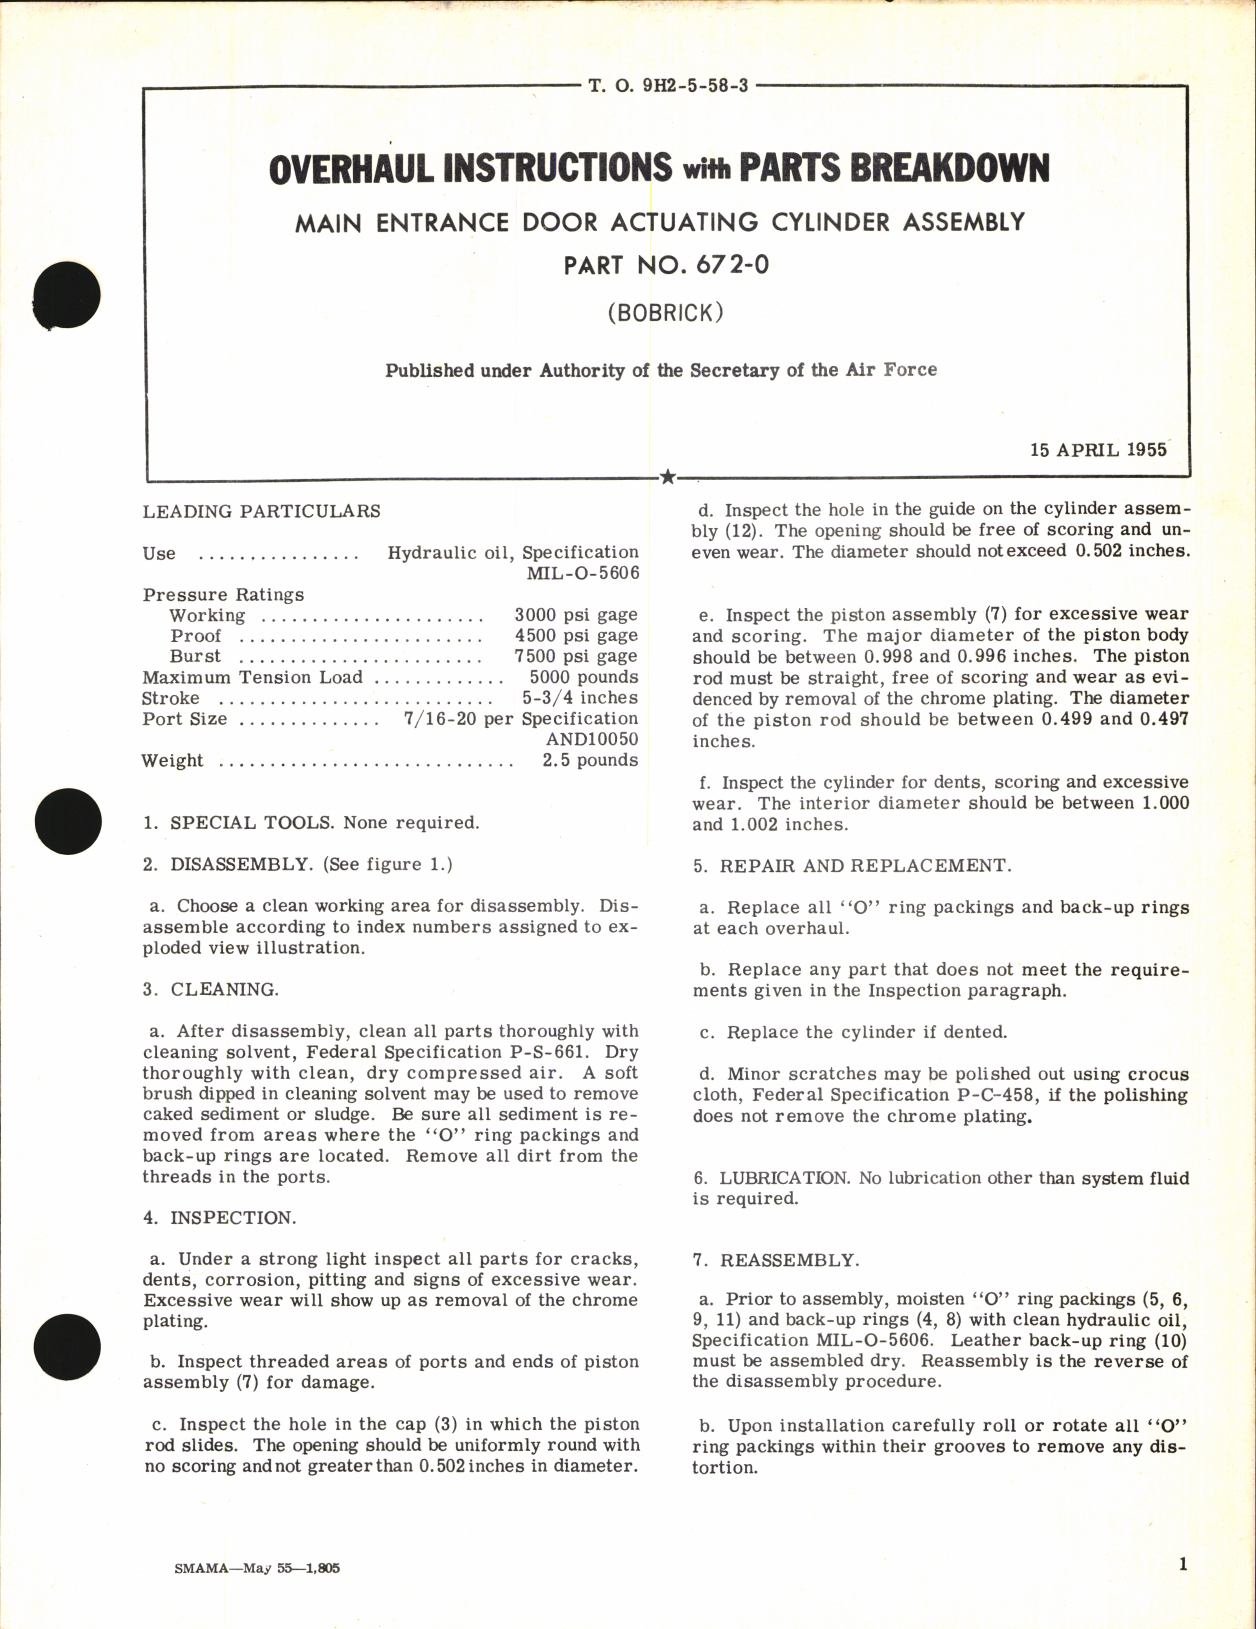 Sample page 1 from AirCorps Library document: Overhaul Instructions with Parts Breakdown for Main Entrance Door Actuating Cylinder Assembly Part No. 672-0